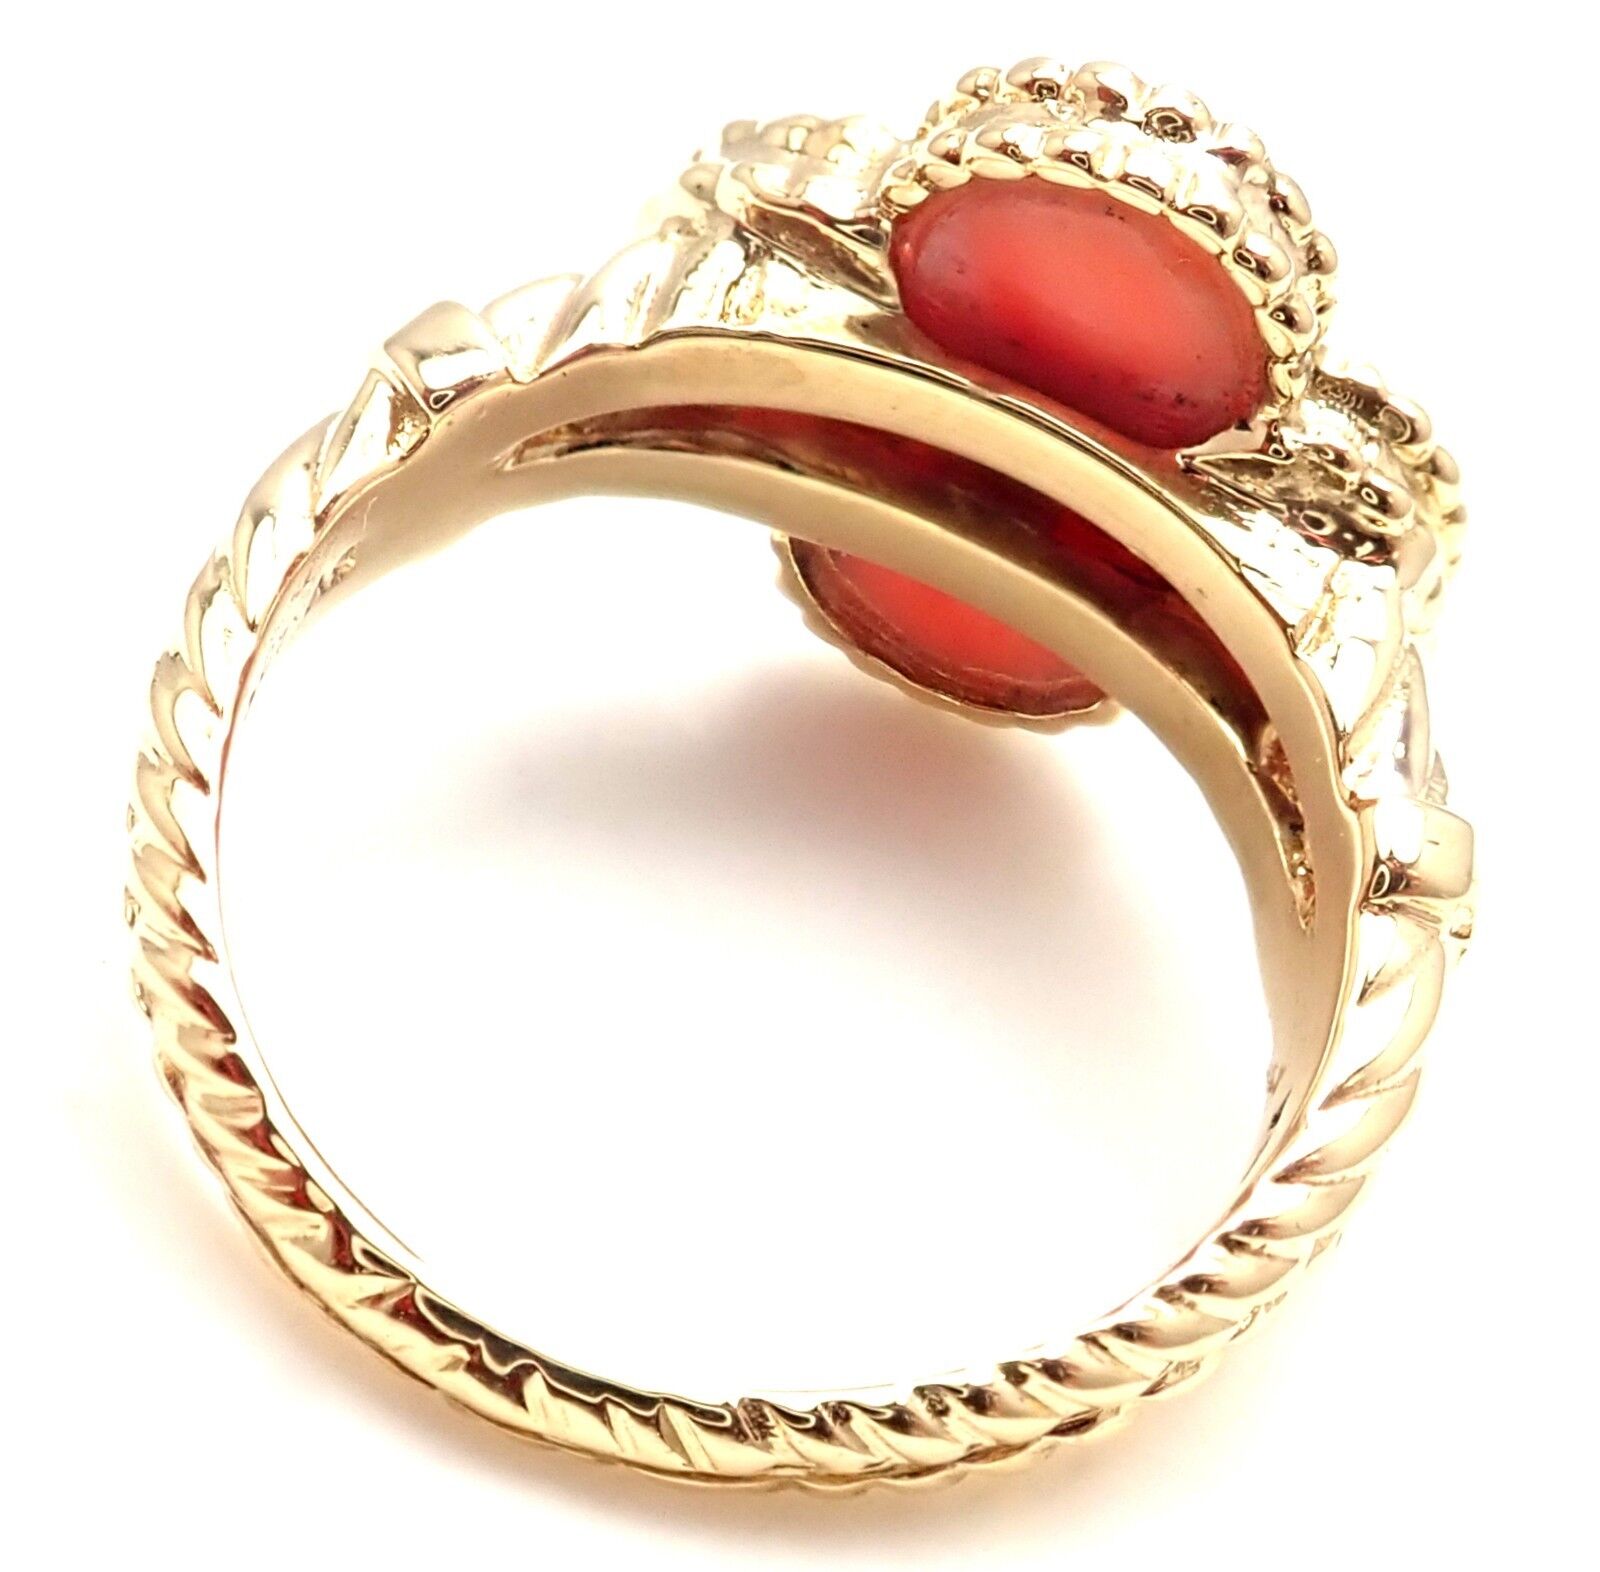 Van Cleef & Arpels Jewelry & Watches:Fine Jewelry:Rings Rare! Authentic Van Cleef & Arpels Alhambra 18k Yellow Gold Coral Diamond Ring